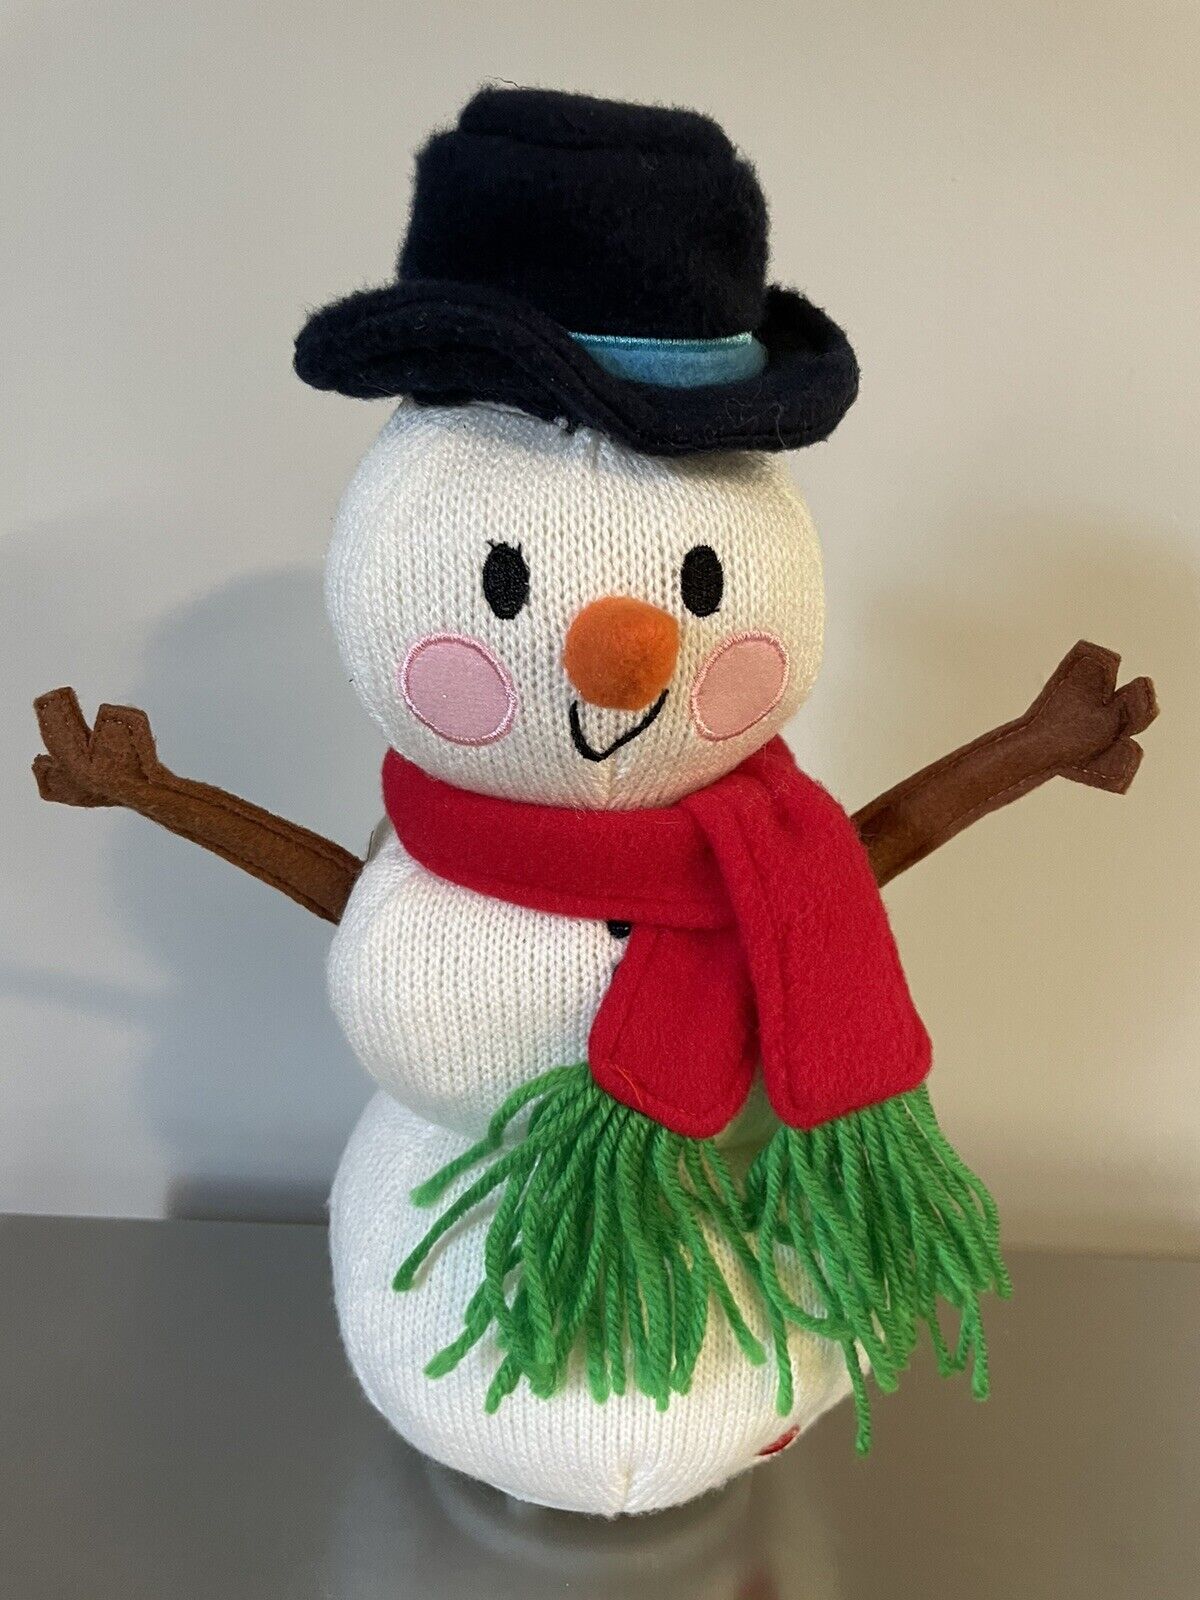 Target Gemmy Dancing Spinning Singing Knit Snowman Let It Snow Animated Plush 11